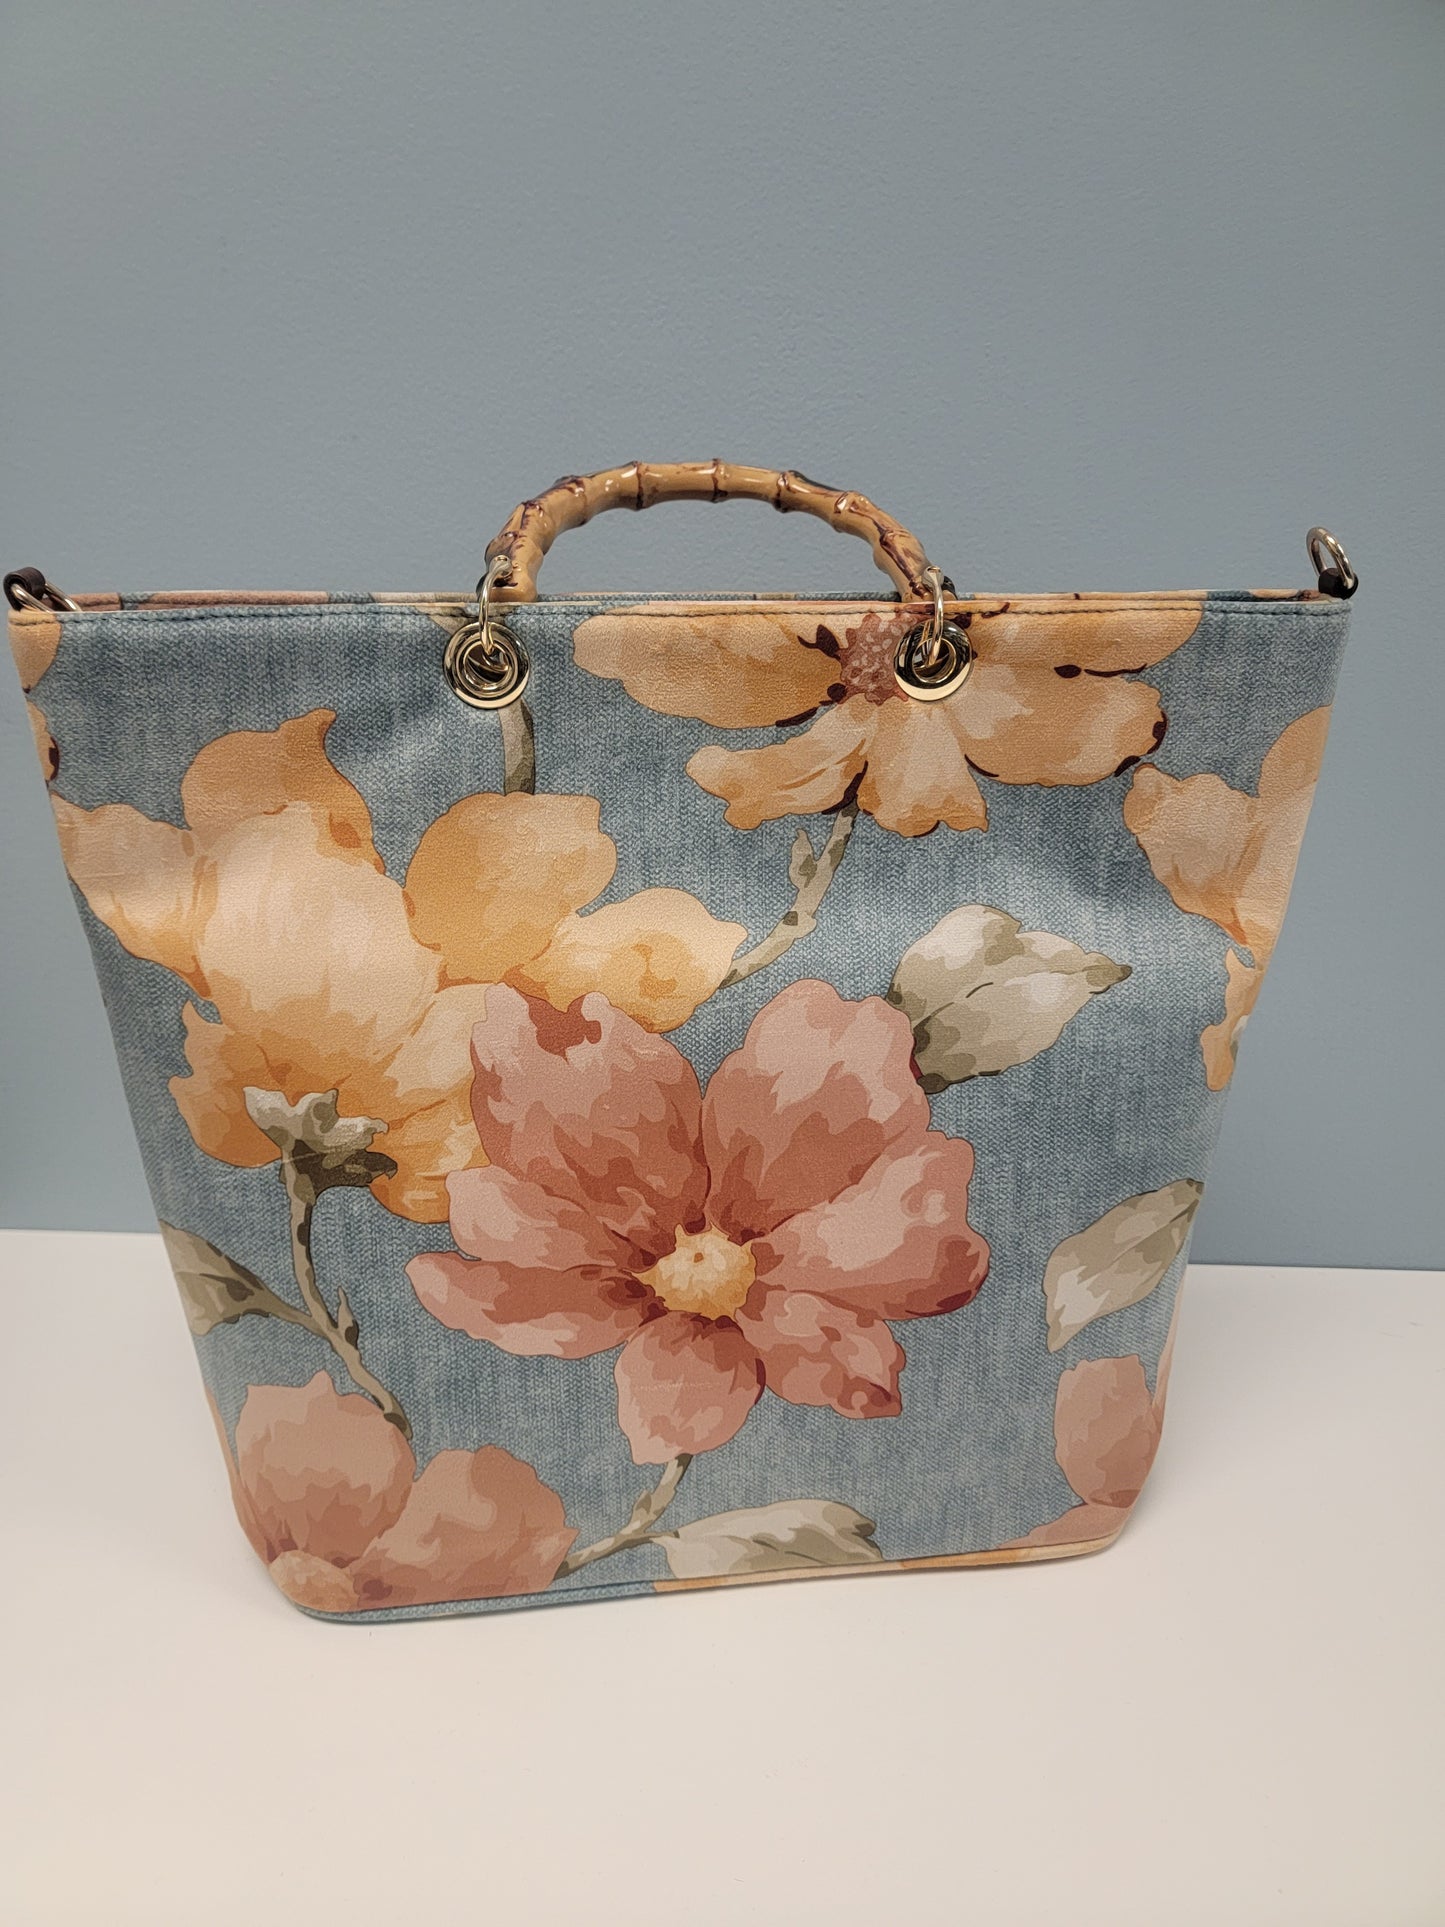 Blue Floral Bag with wood handles